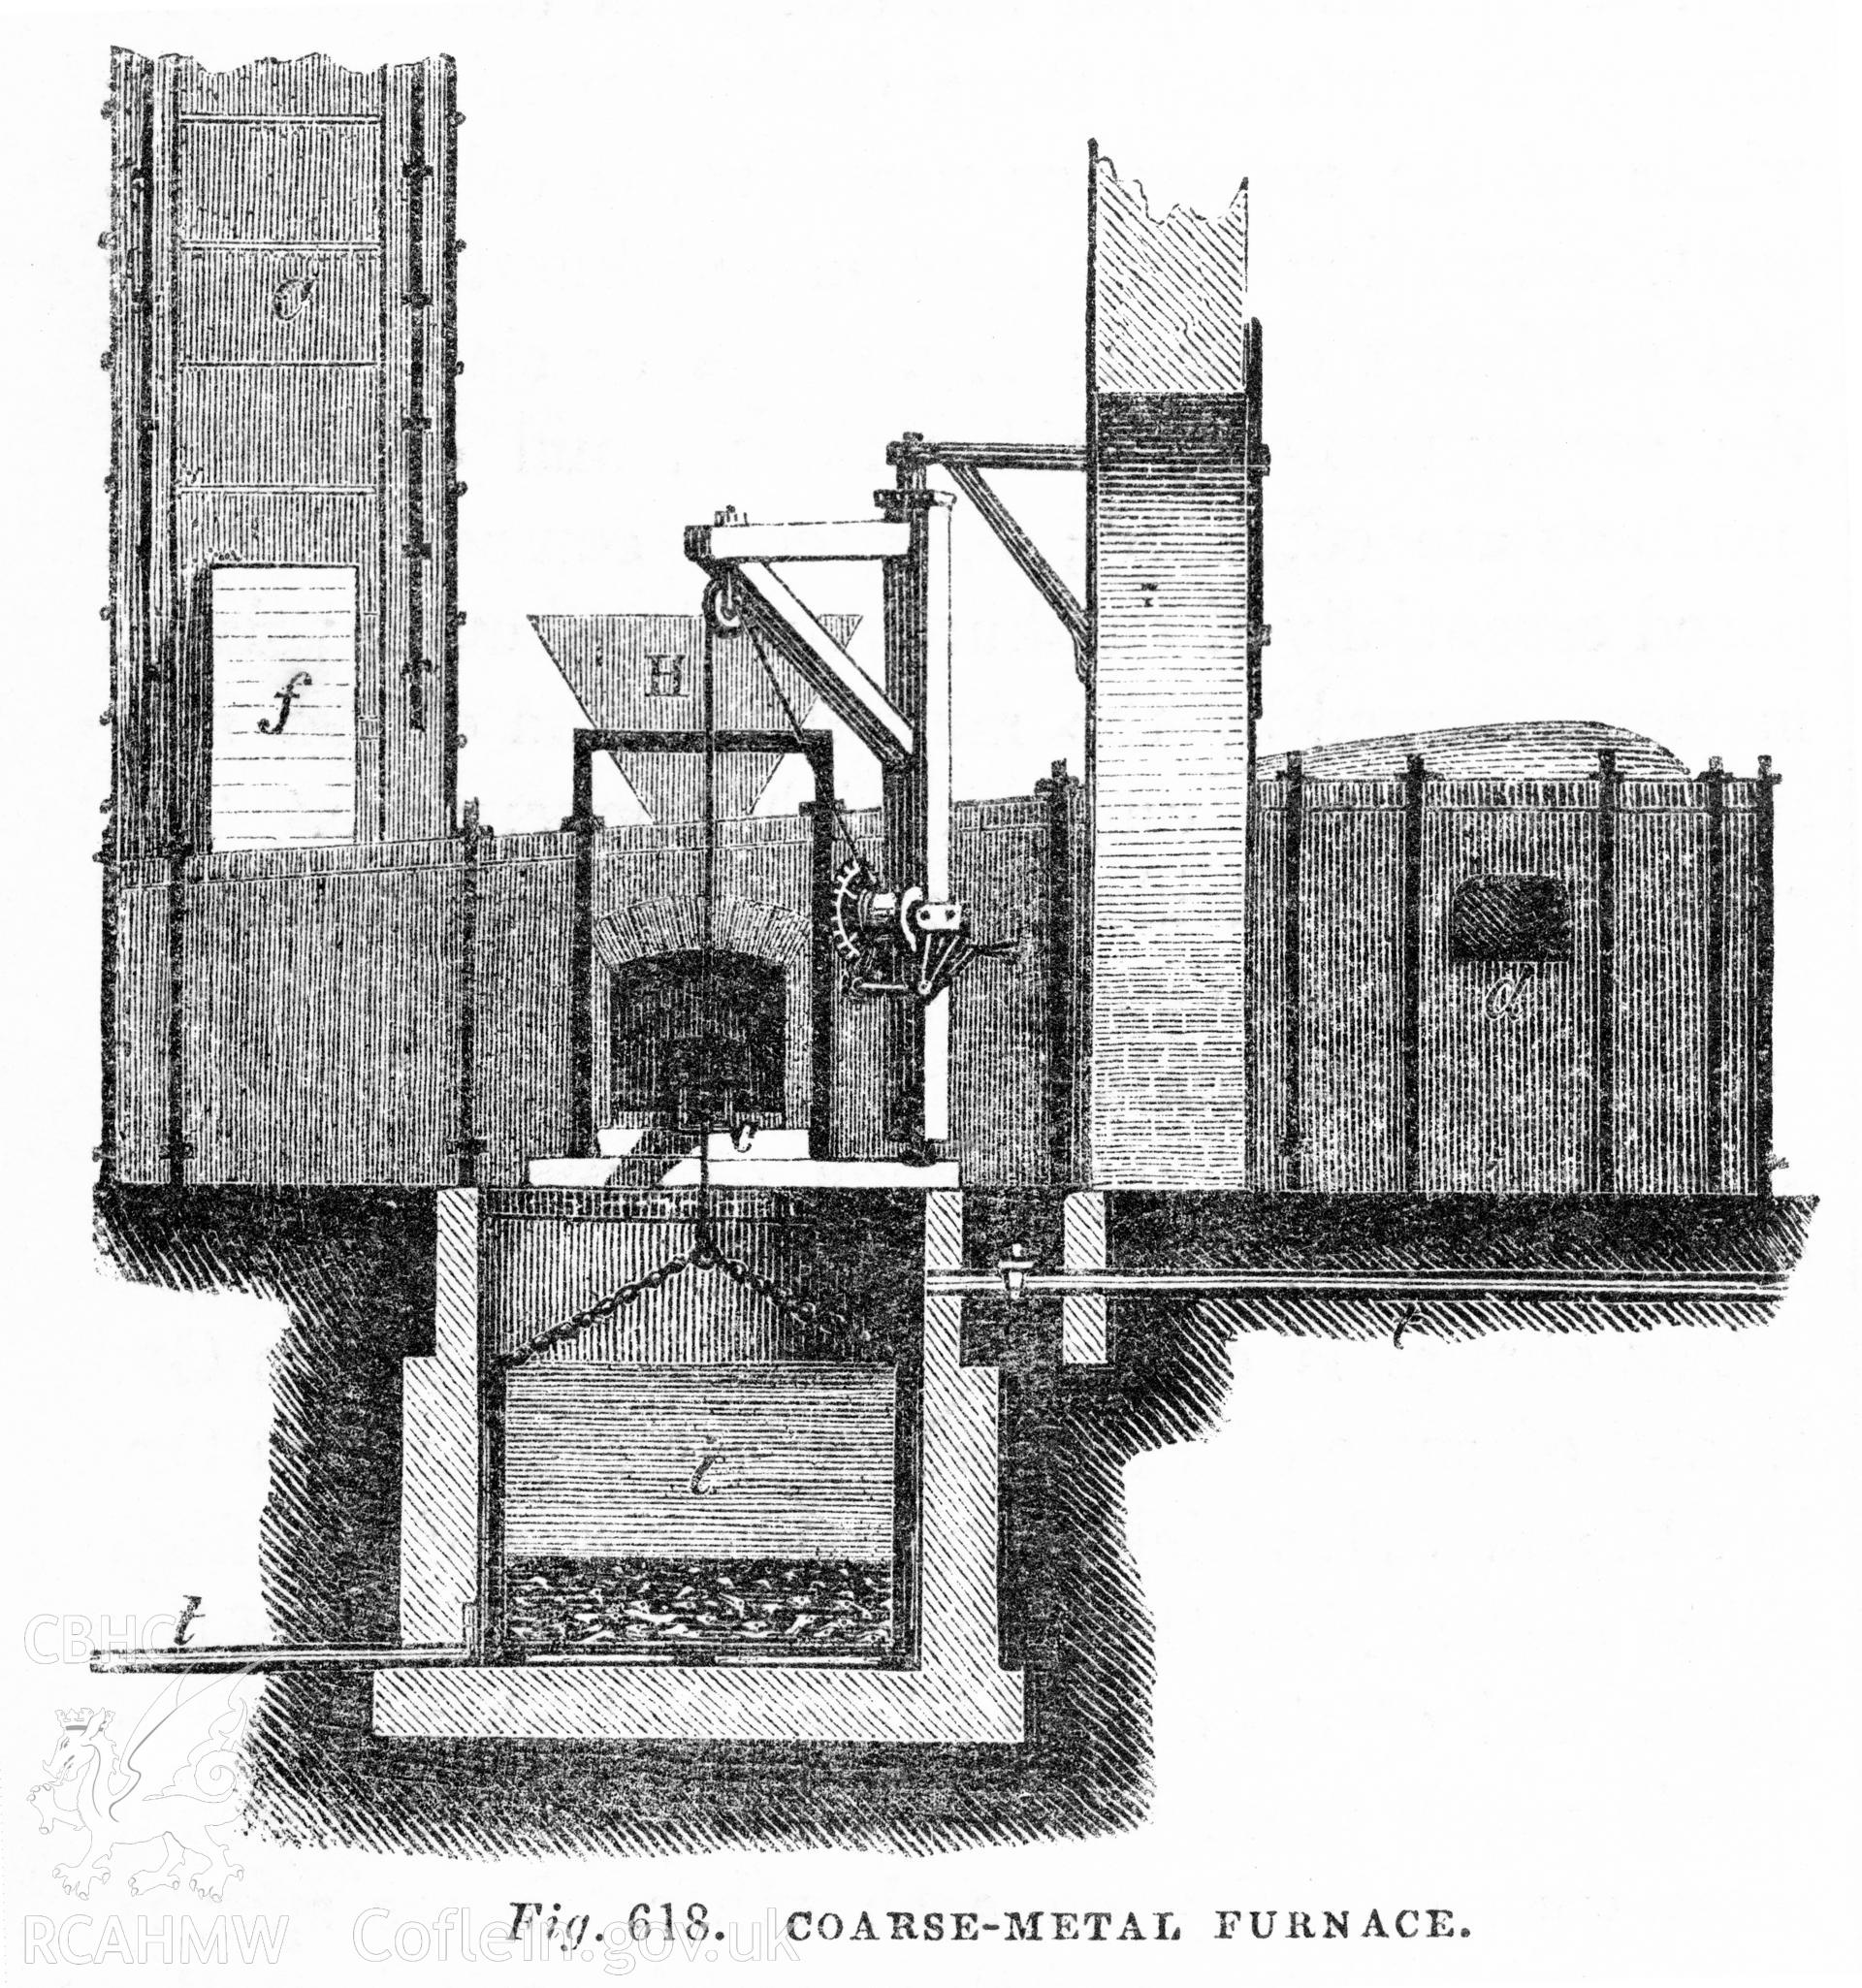 Digitized image of a drawing showing of coarse metal melting furnace, as published fig 618 from Tomlinson's 'Cyclopedia of Useful Arts, Manufacturing, Mining and Engineering' Vol I, 1854.